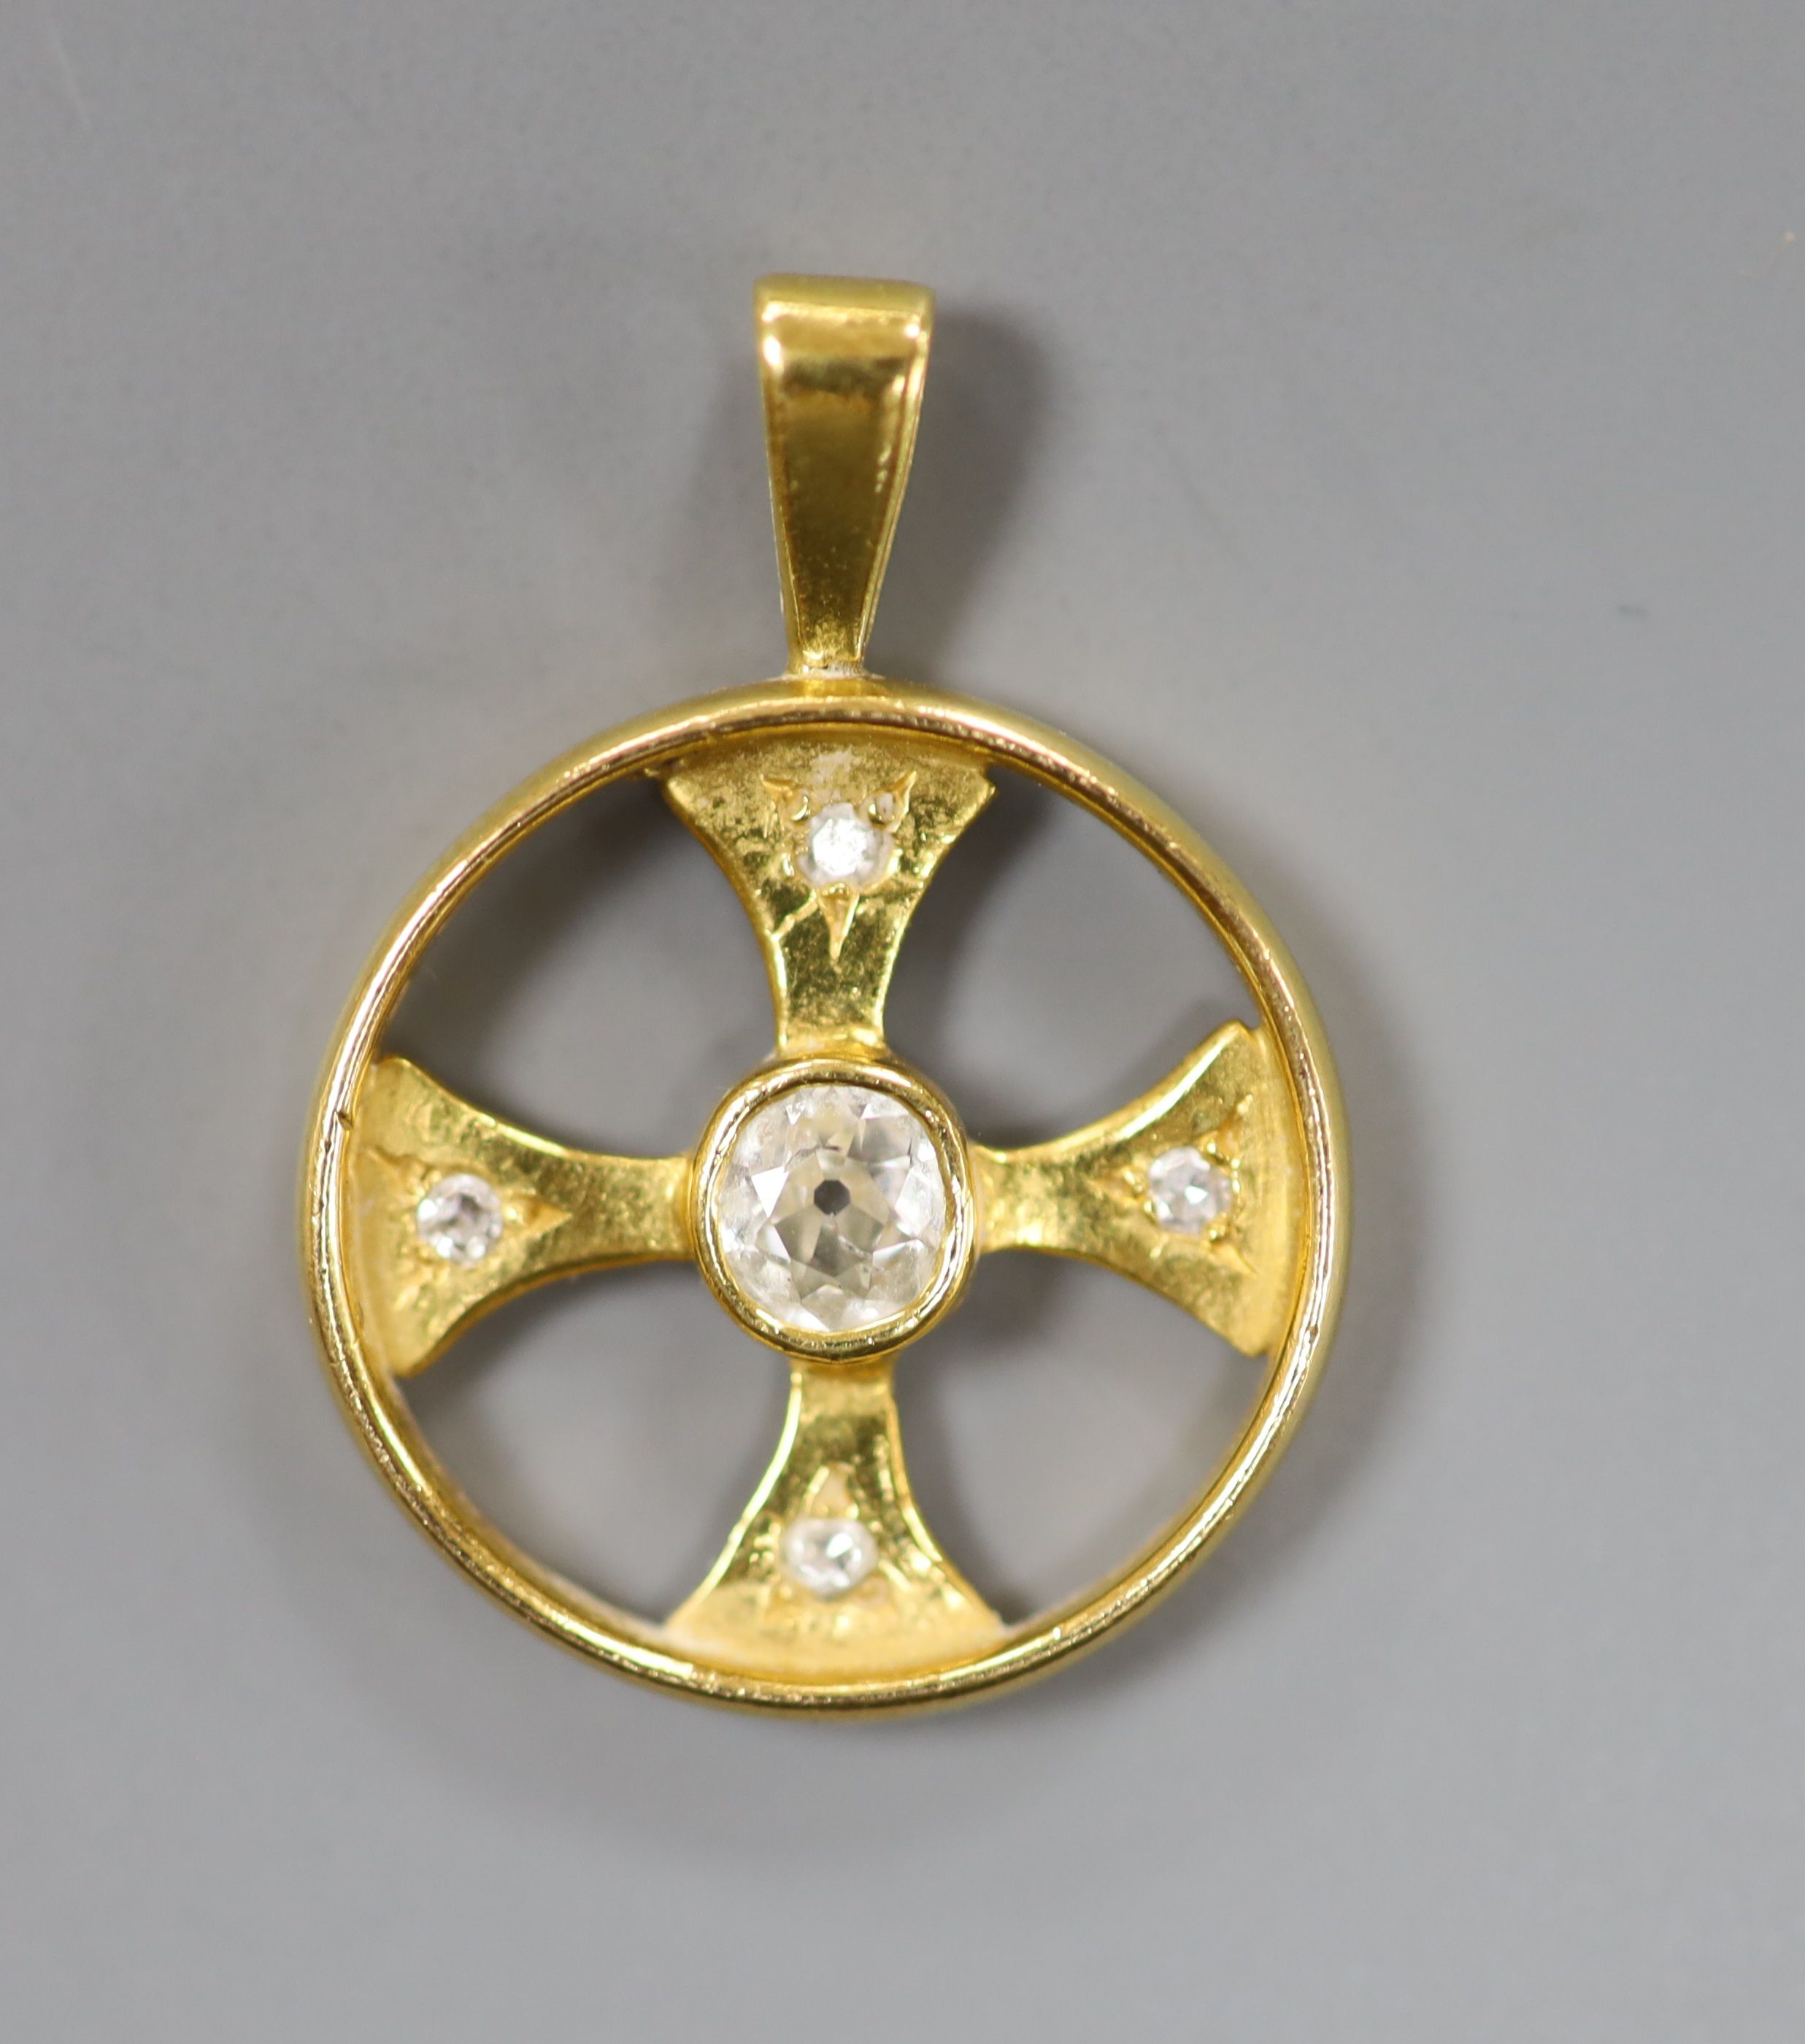 A 22ct gold and diamond set circular pendant (converted wedding band), overall 25mm, gross weight 3.6 grams